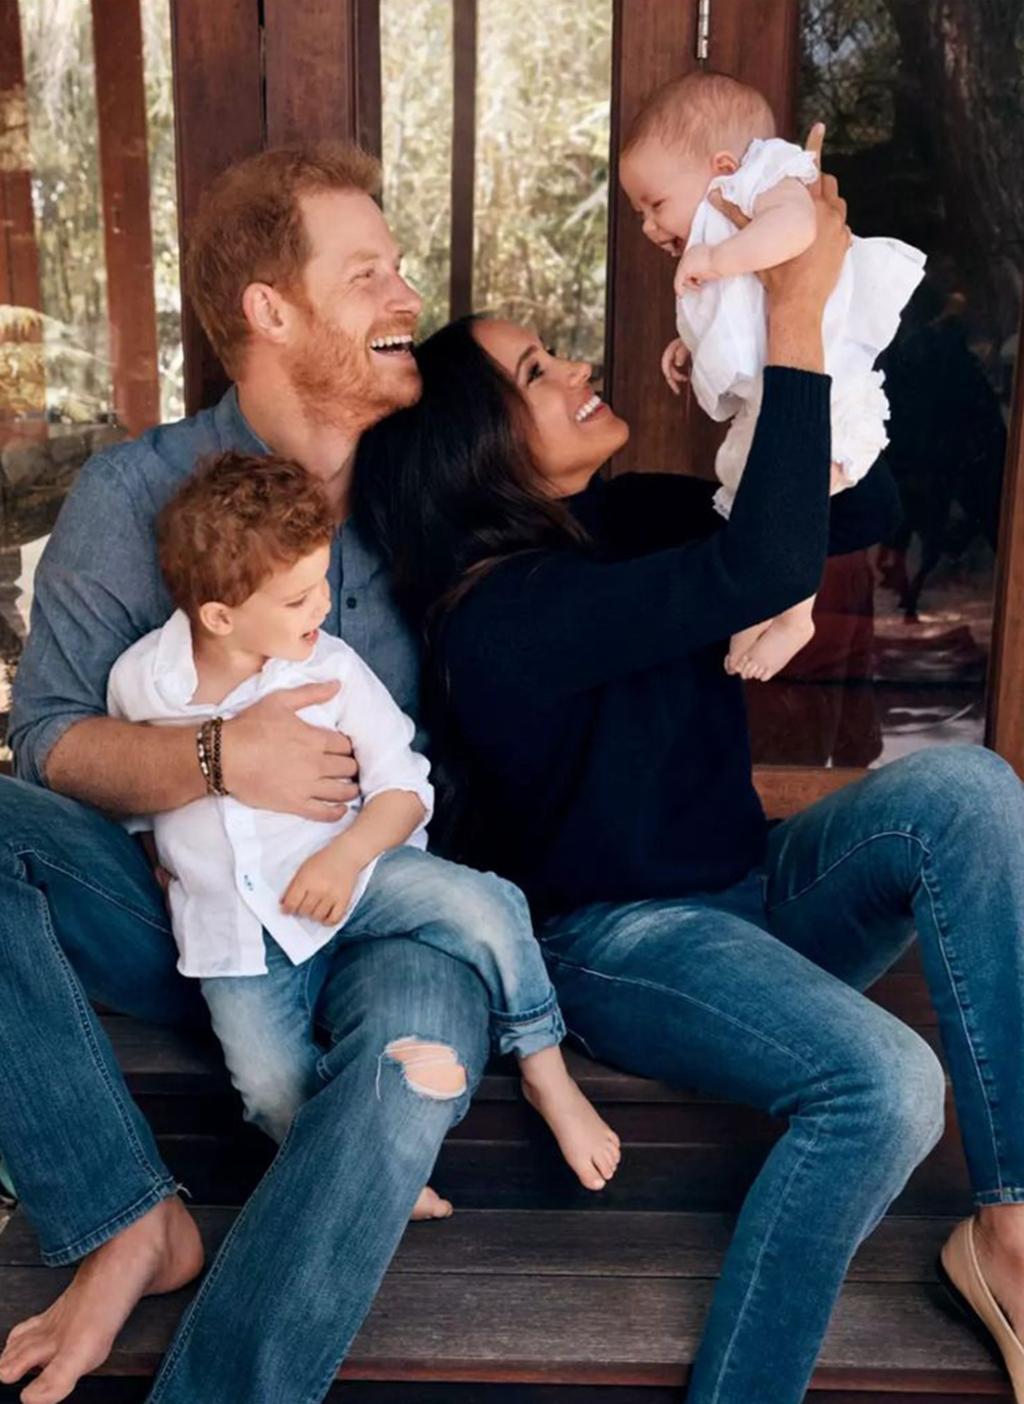 Prince Harry and Meghan Markle’s kids, Archie and Lilibet, now have royal titles